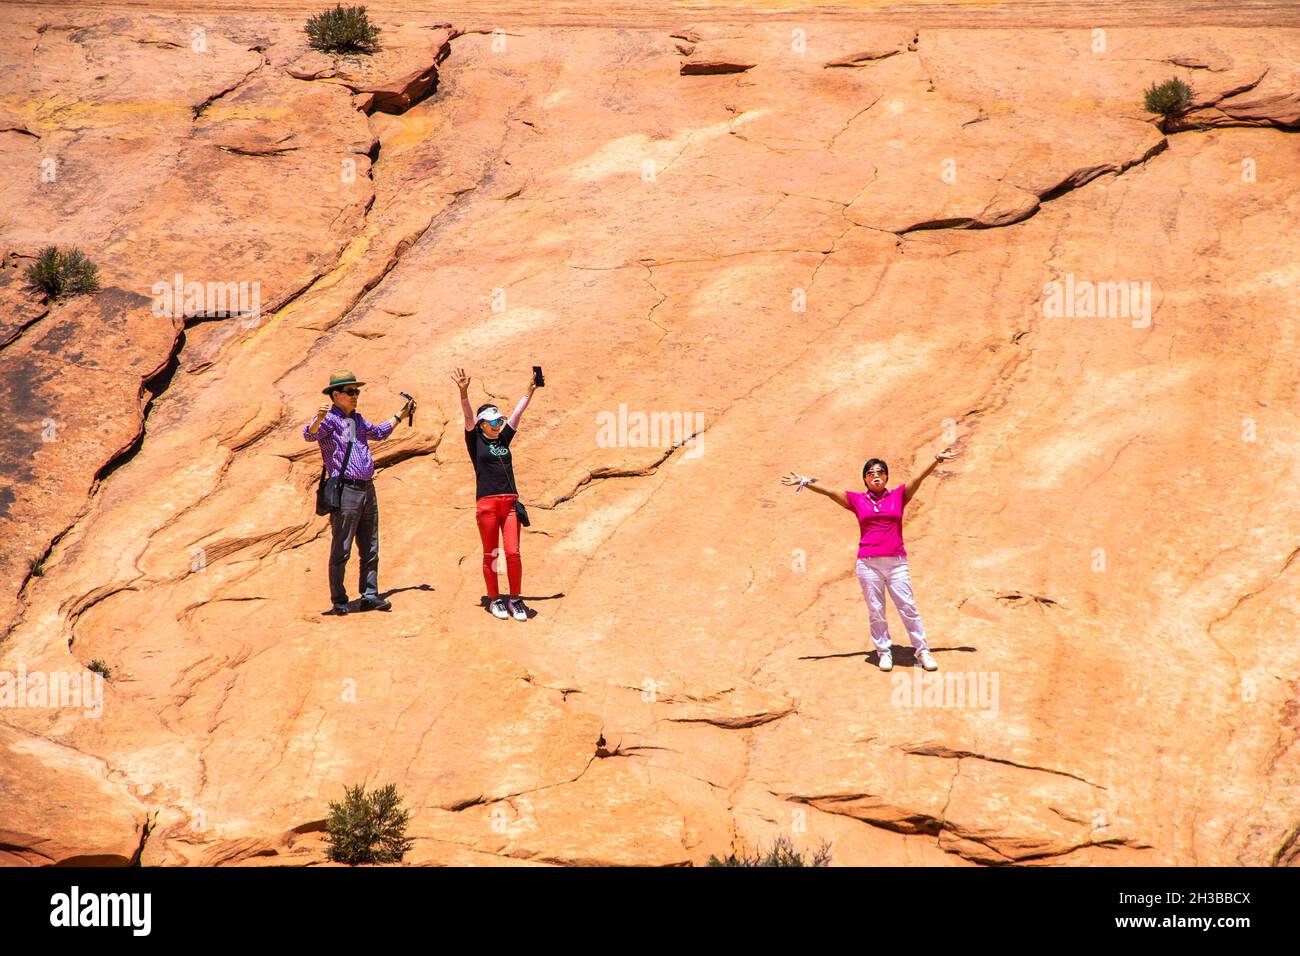 0f-24-2021 Zion Urah USA - People on a slope in Zion National Park in Utah USA taking advantage of the accostics to sing the religious song How Great Stock Photo